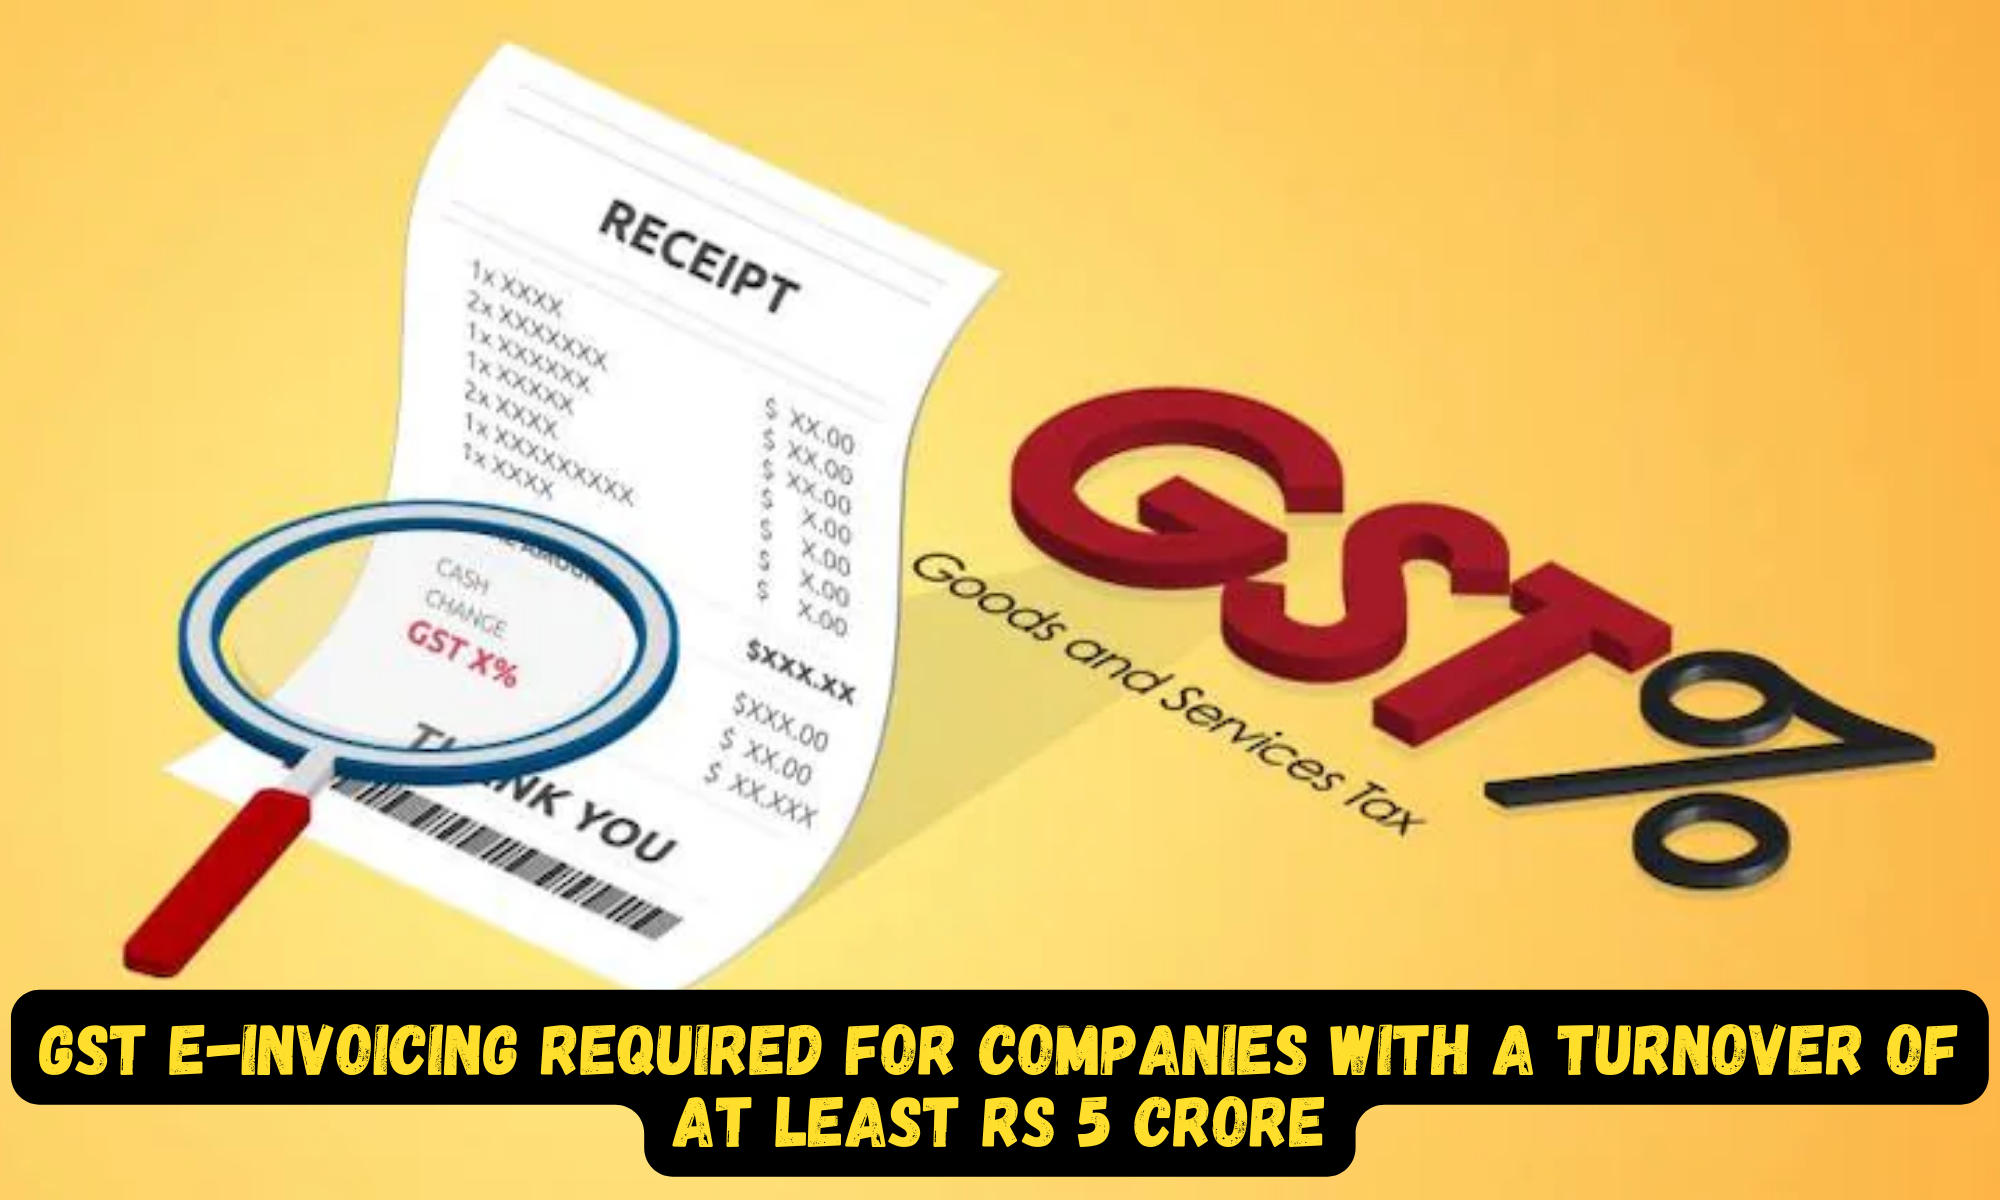 GST e-invoicing is required for companies with a turnover of at least Rs 5 crore_30.1